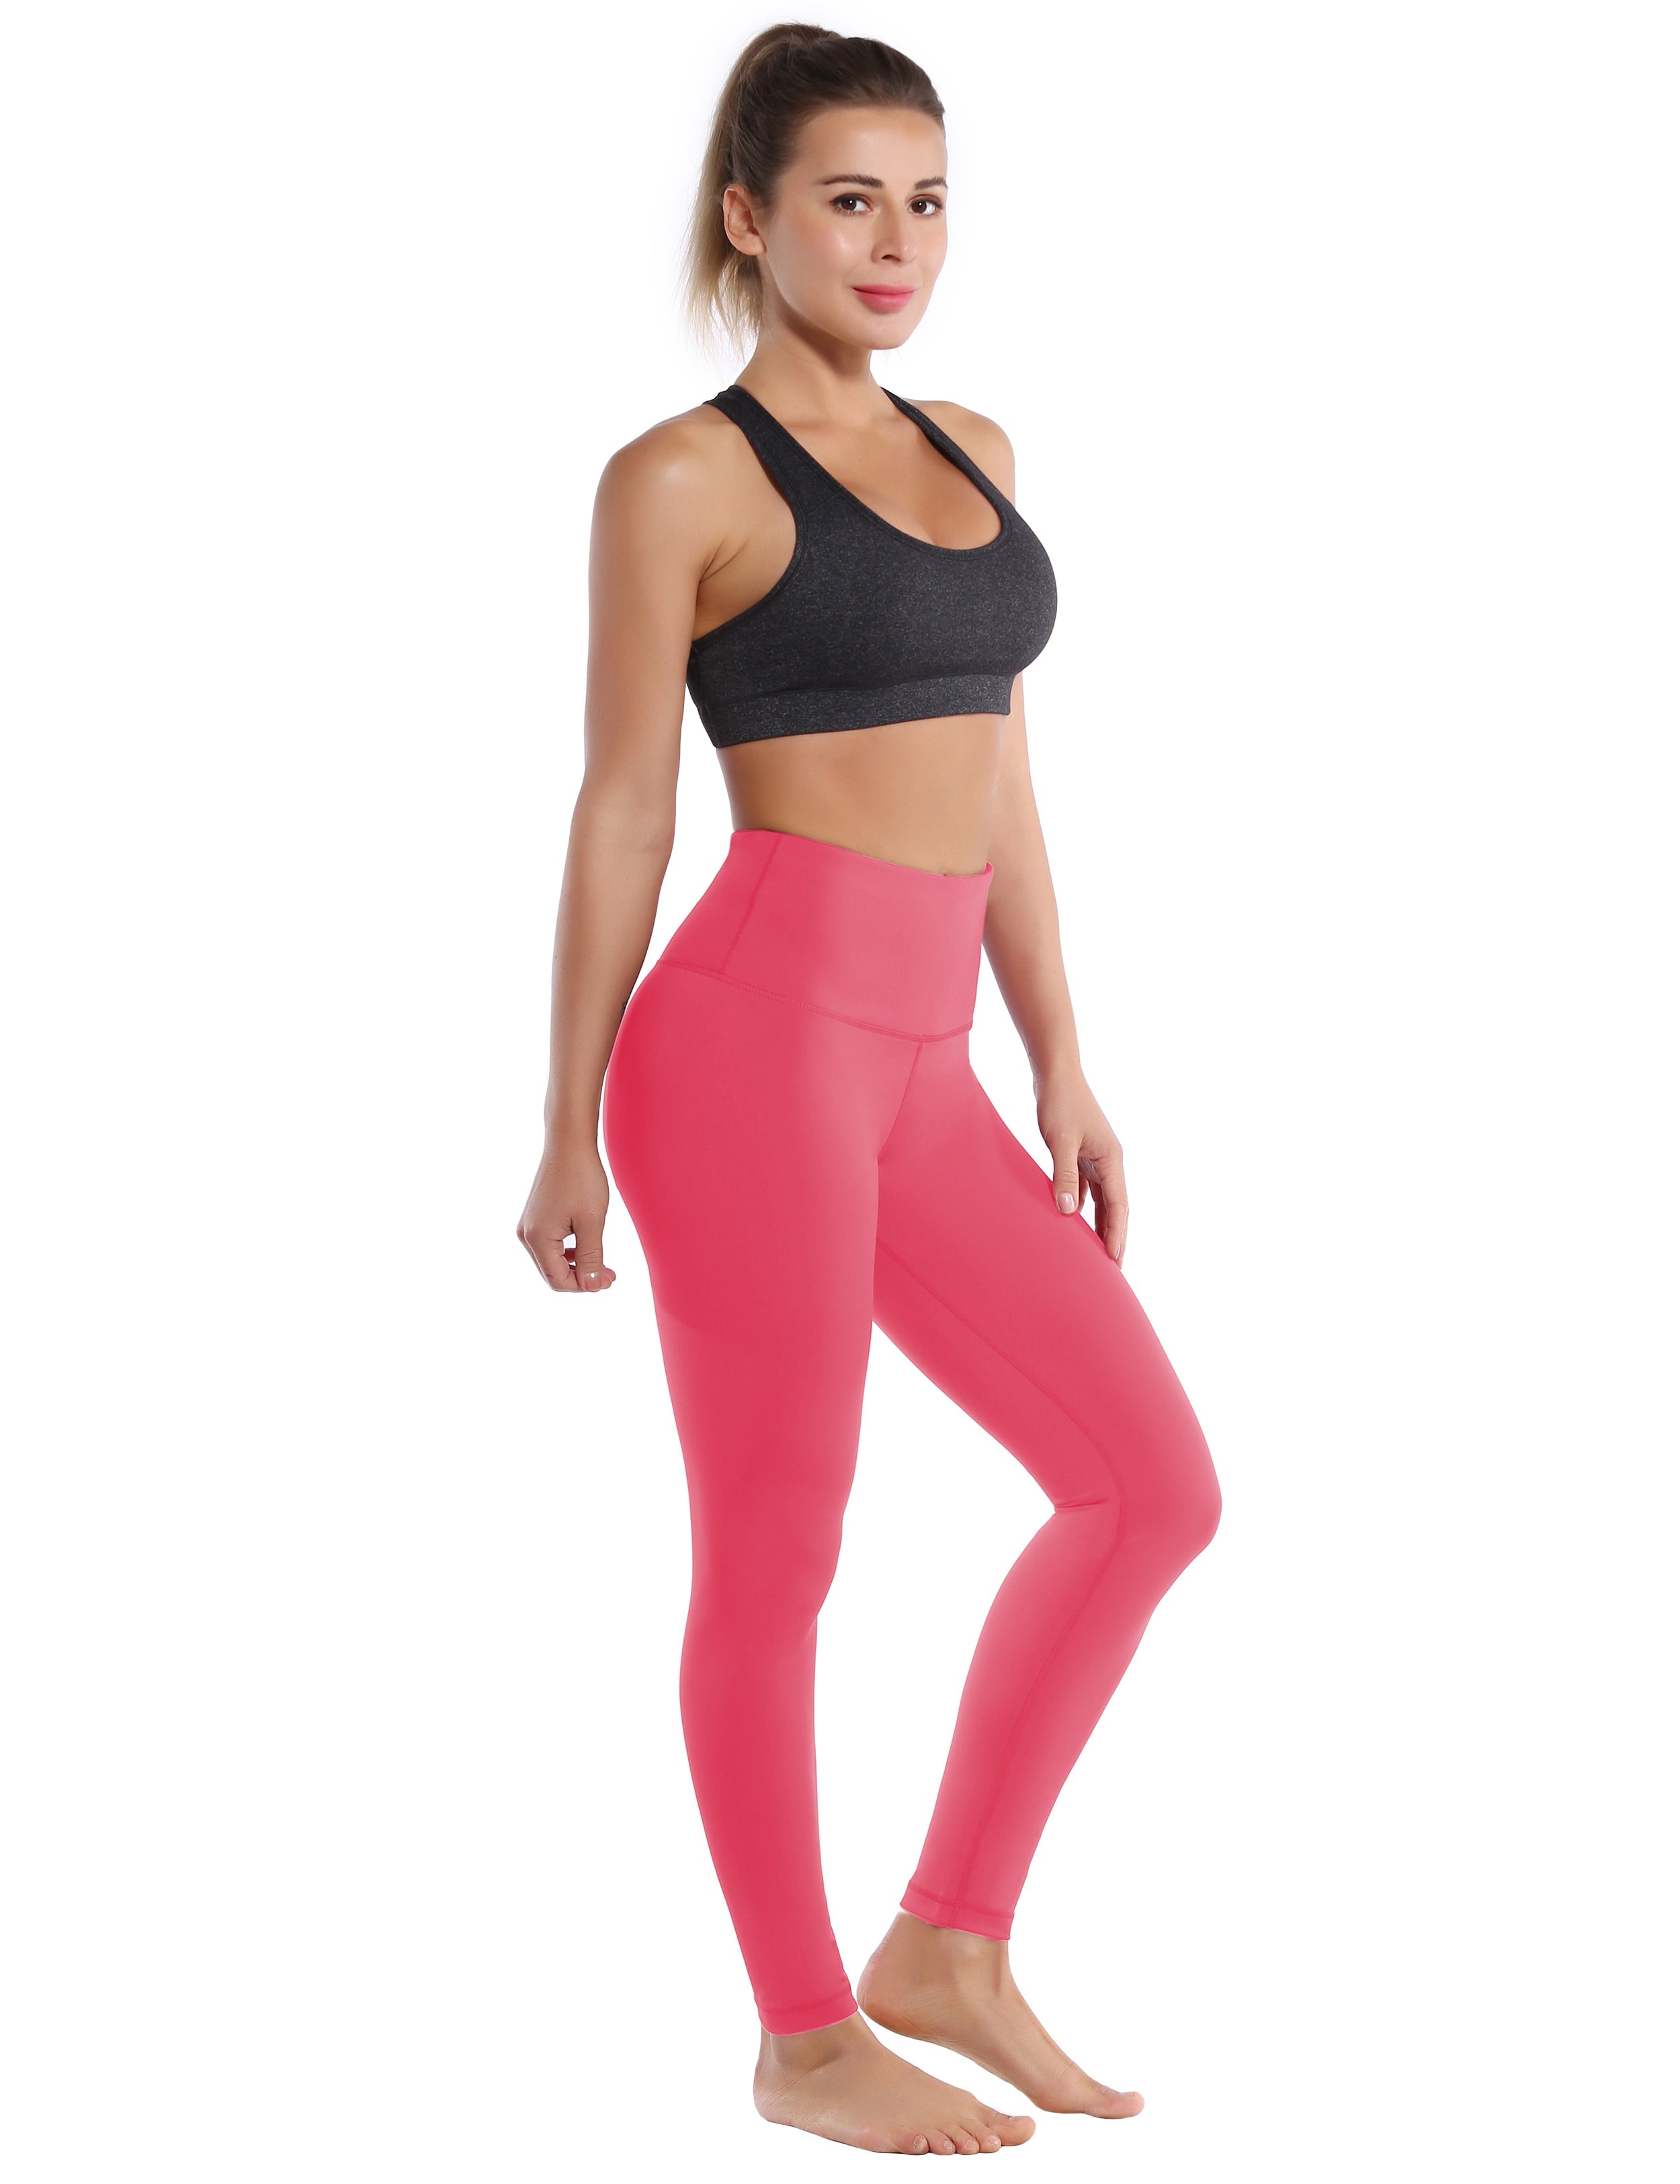 High Waist Running Pants rosecoral 75%Nylon/25%Spandex Fabric doesn't attract lint easily 4-way stretch No see-through Moisture-wicking Tummy control Inner pocket Four lengths